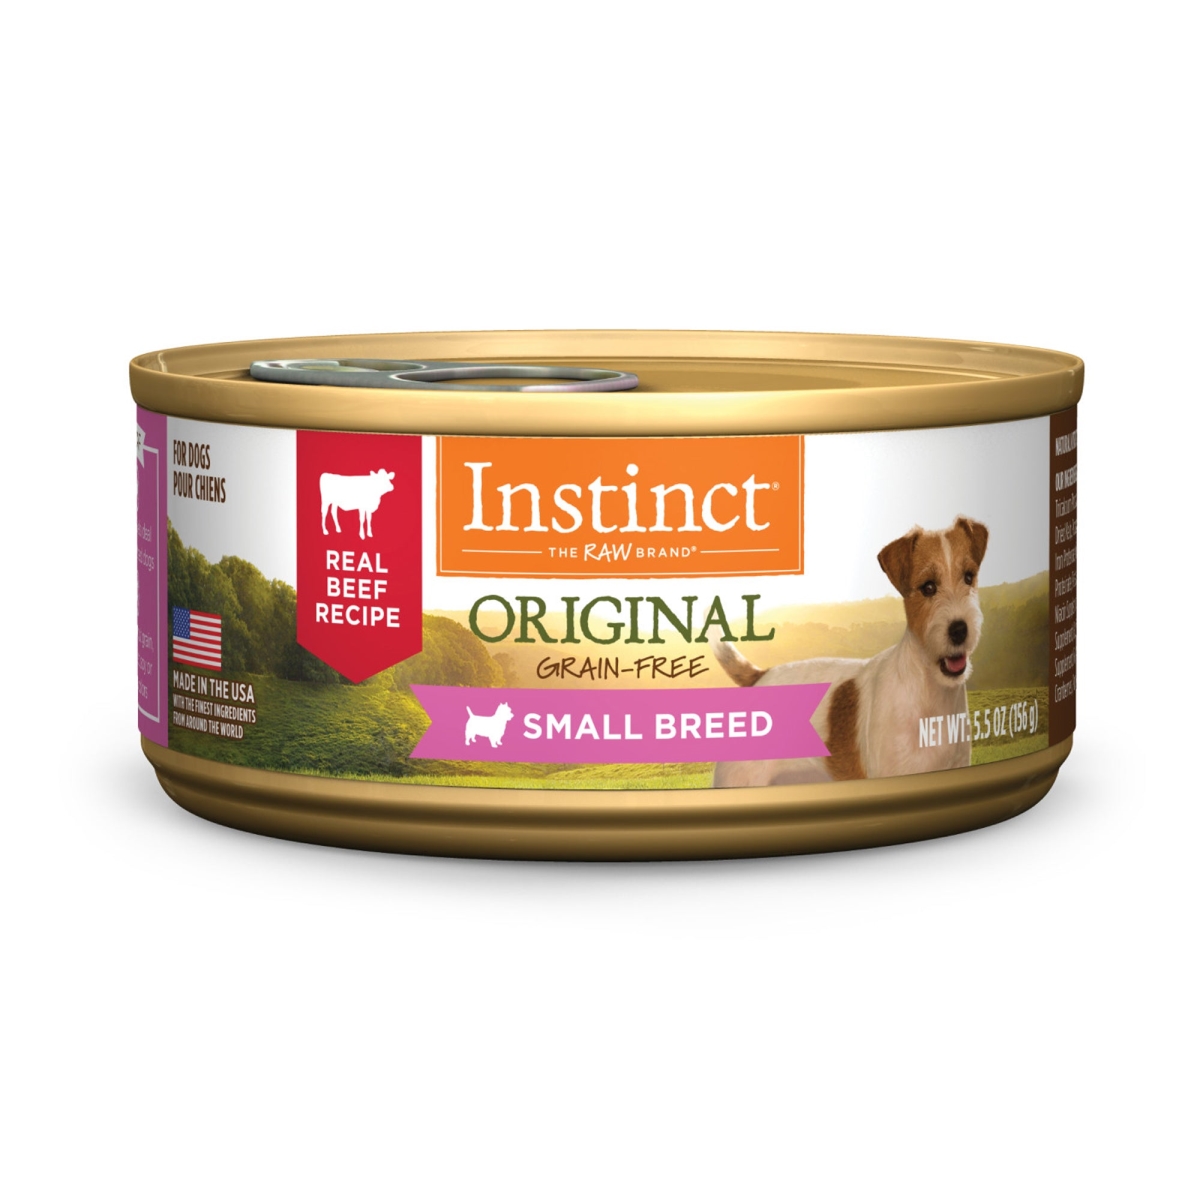 Picture of Natures Variety 769949610274 5.5 oz Original Small Breed Beef Instinct Dog Food Can - Case of 12